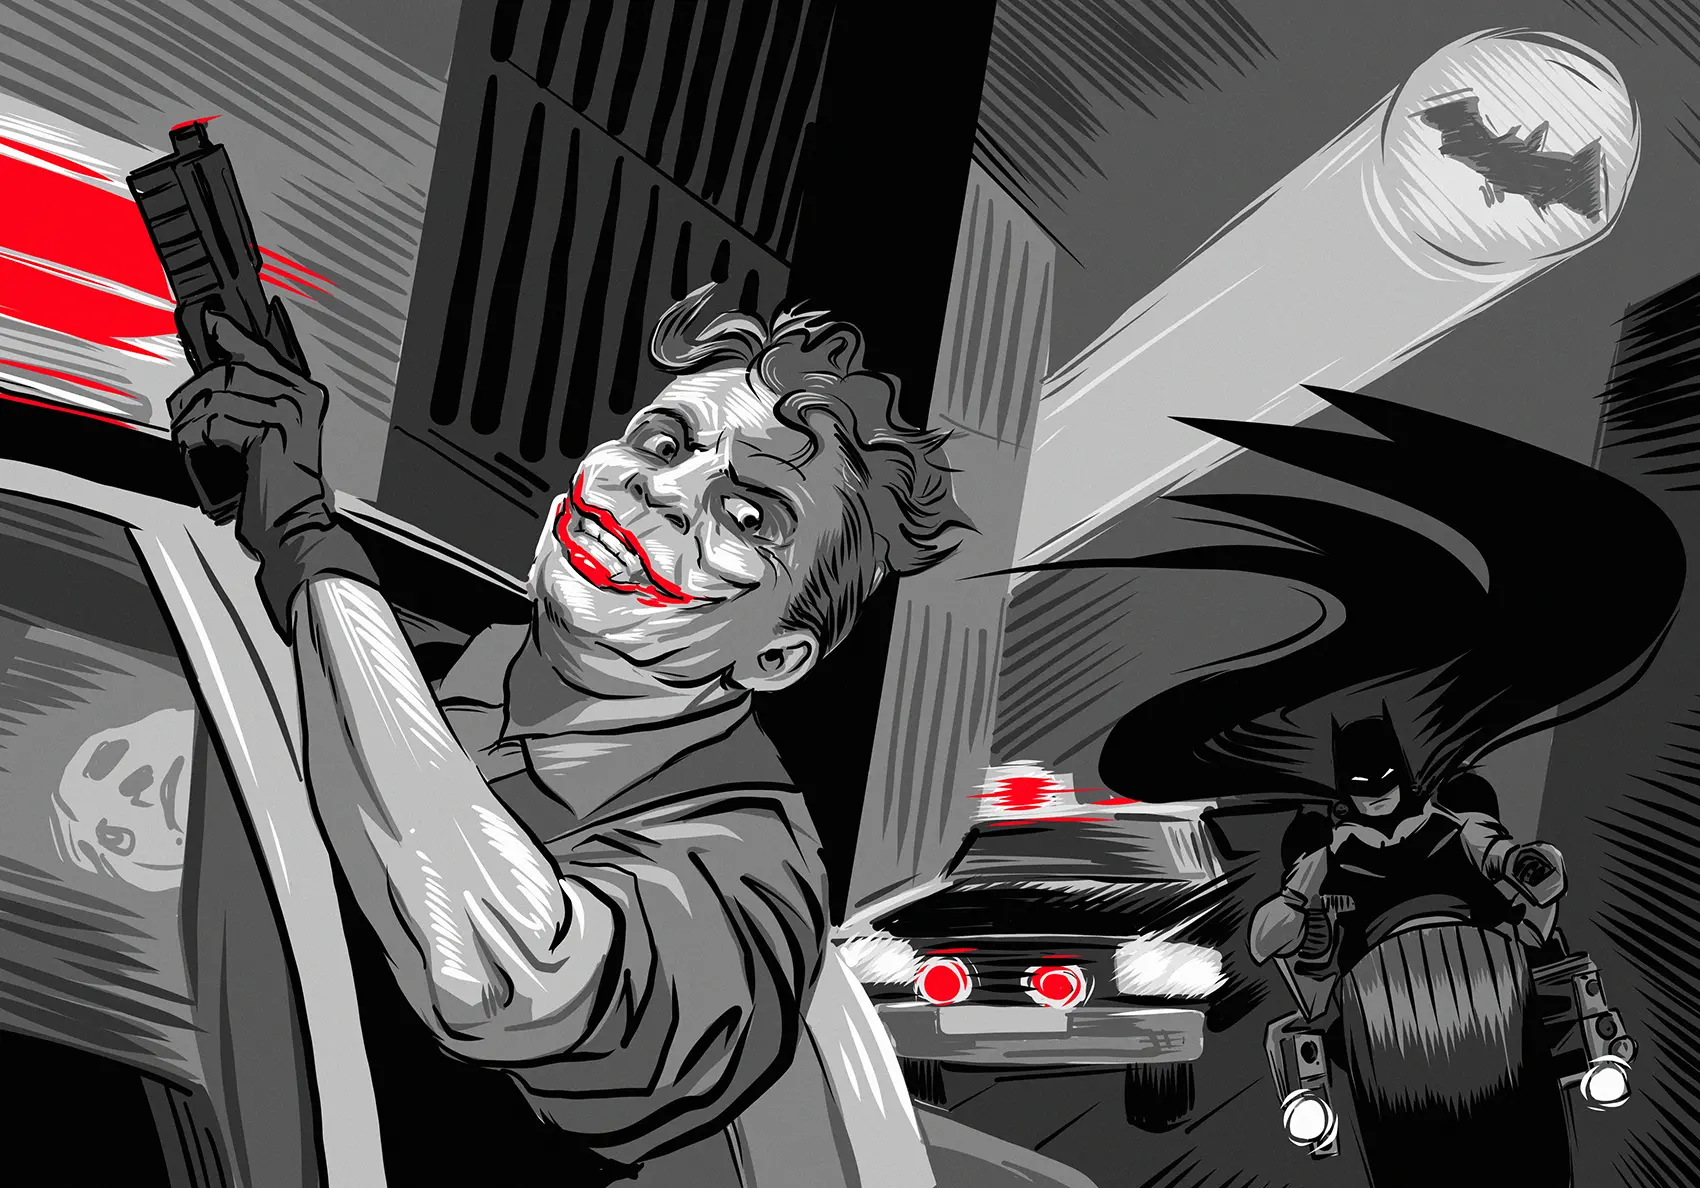 Joker fights the law…and Batman